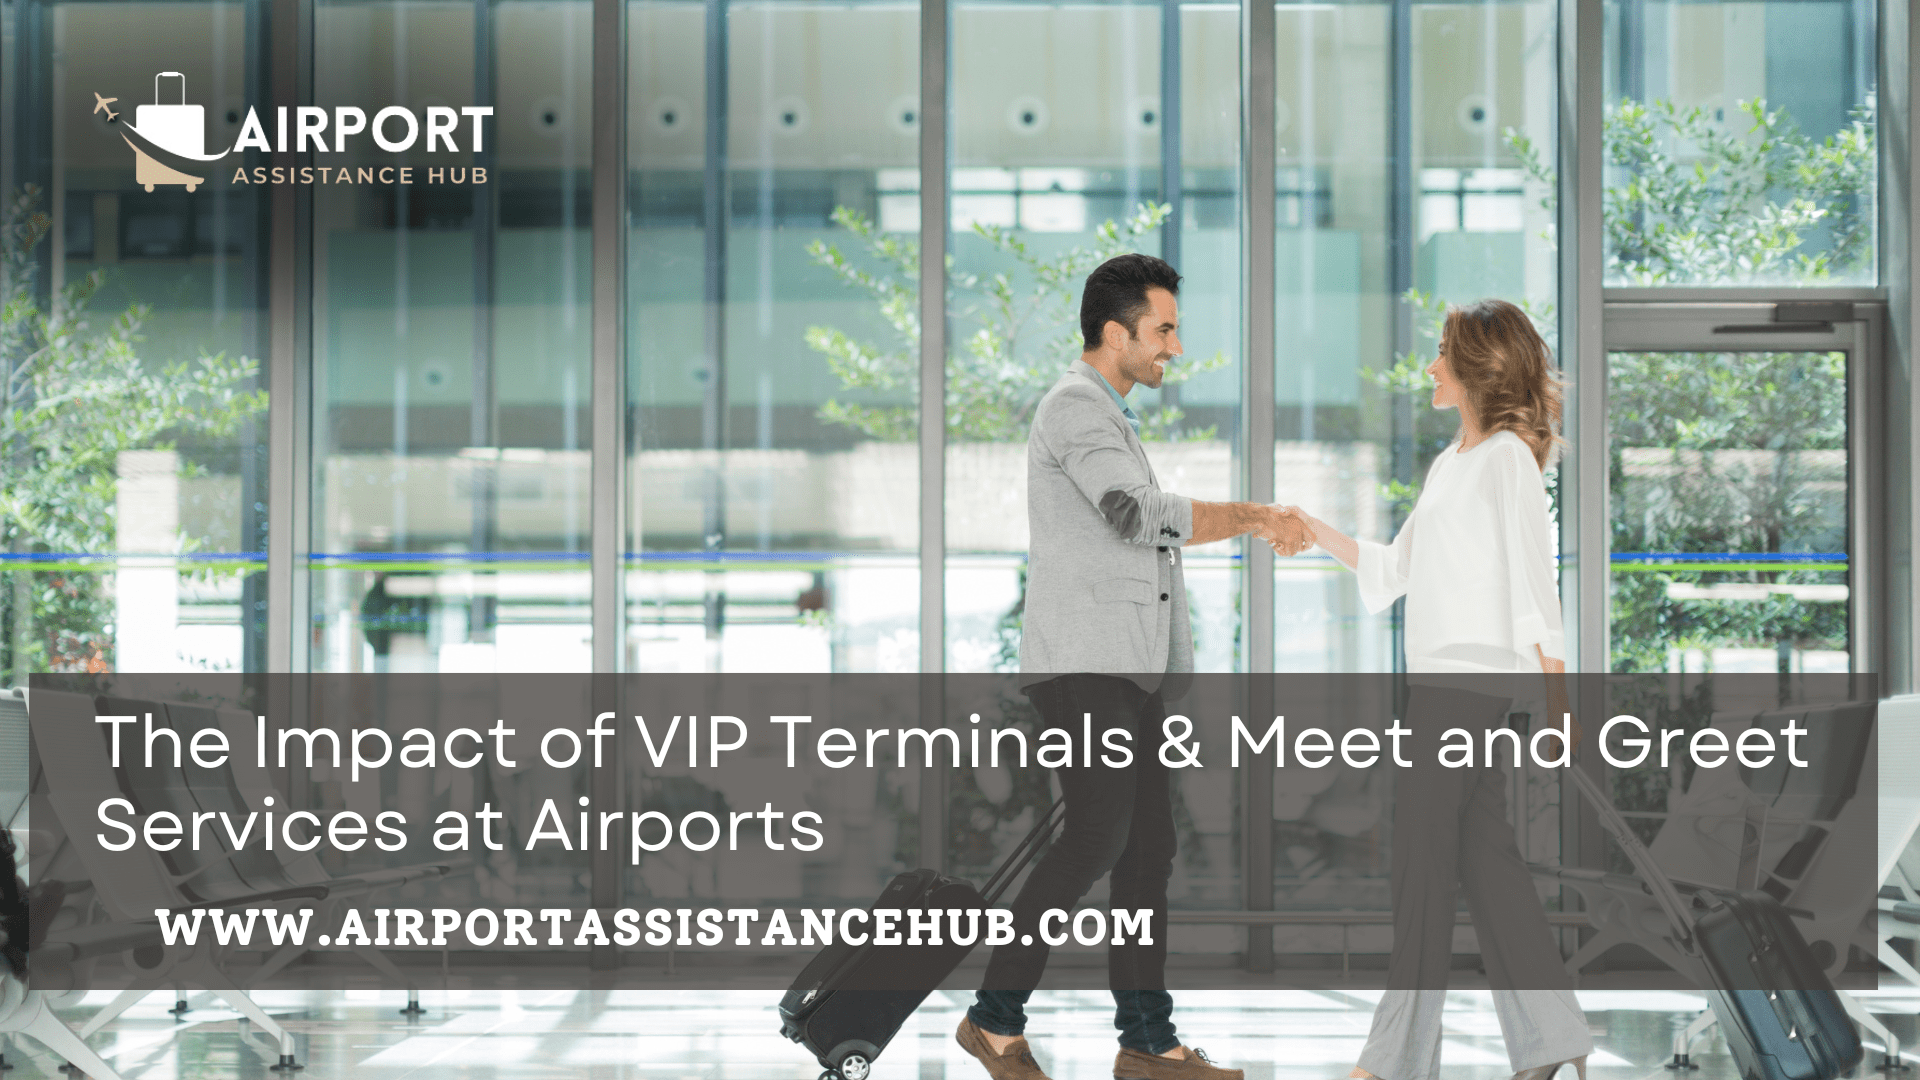 The Impact of VIP Terminals & Meet and Greet Services at Airports